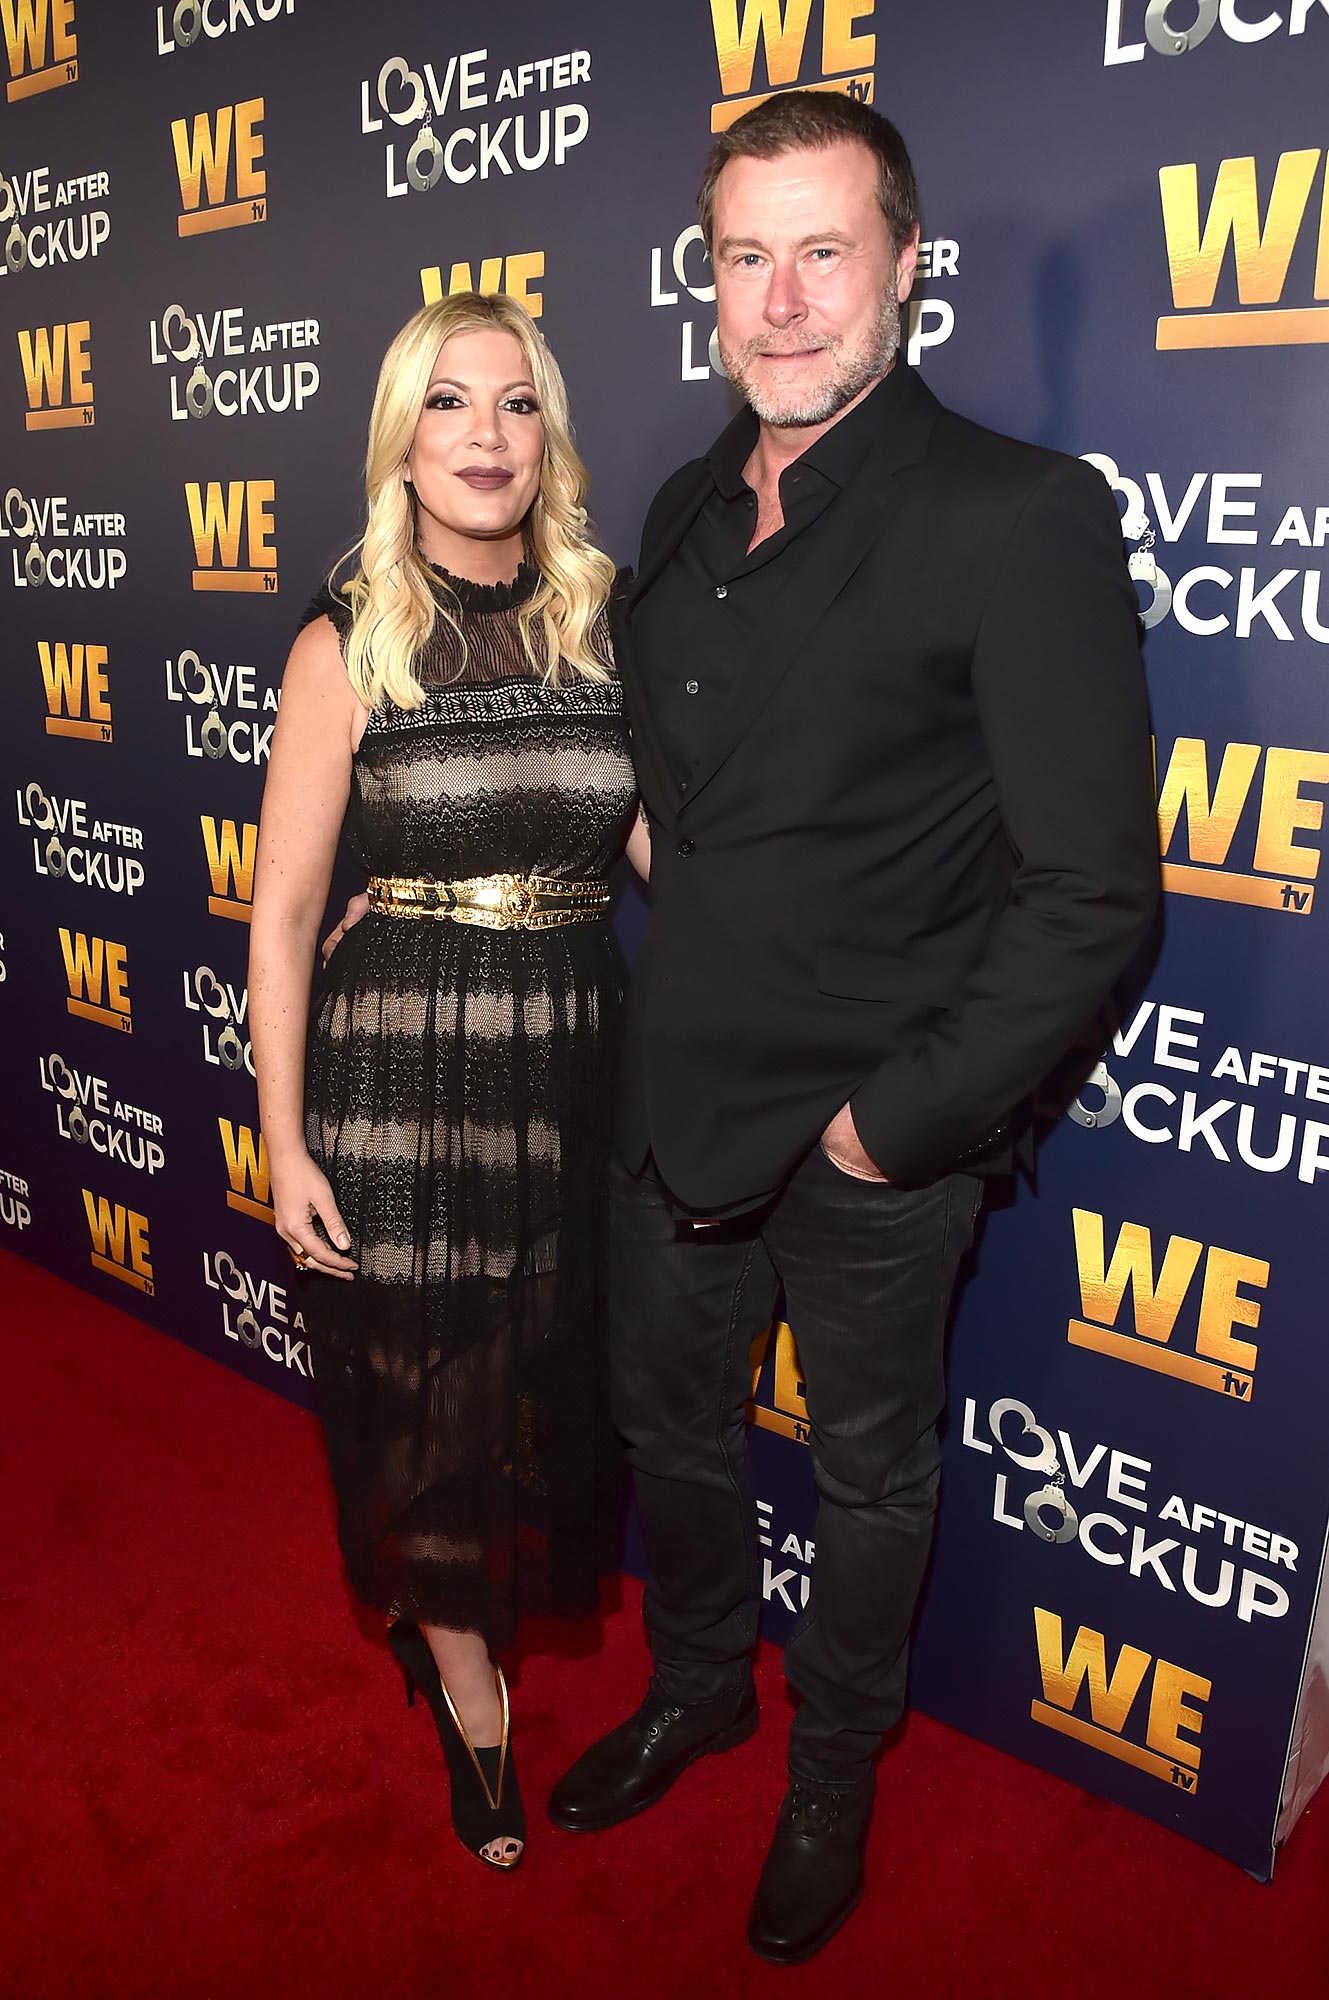 Tori Spelling Recalls Throwing Perfectly Loaded Baked Potato During Final Fight With Dean McDermott